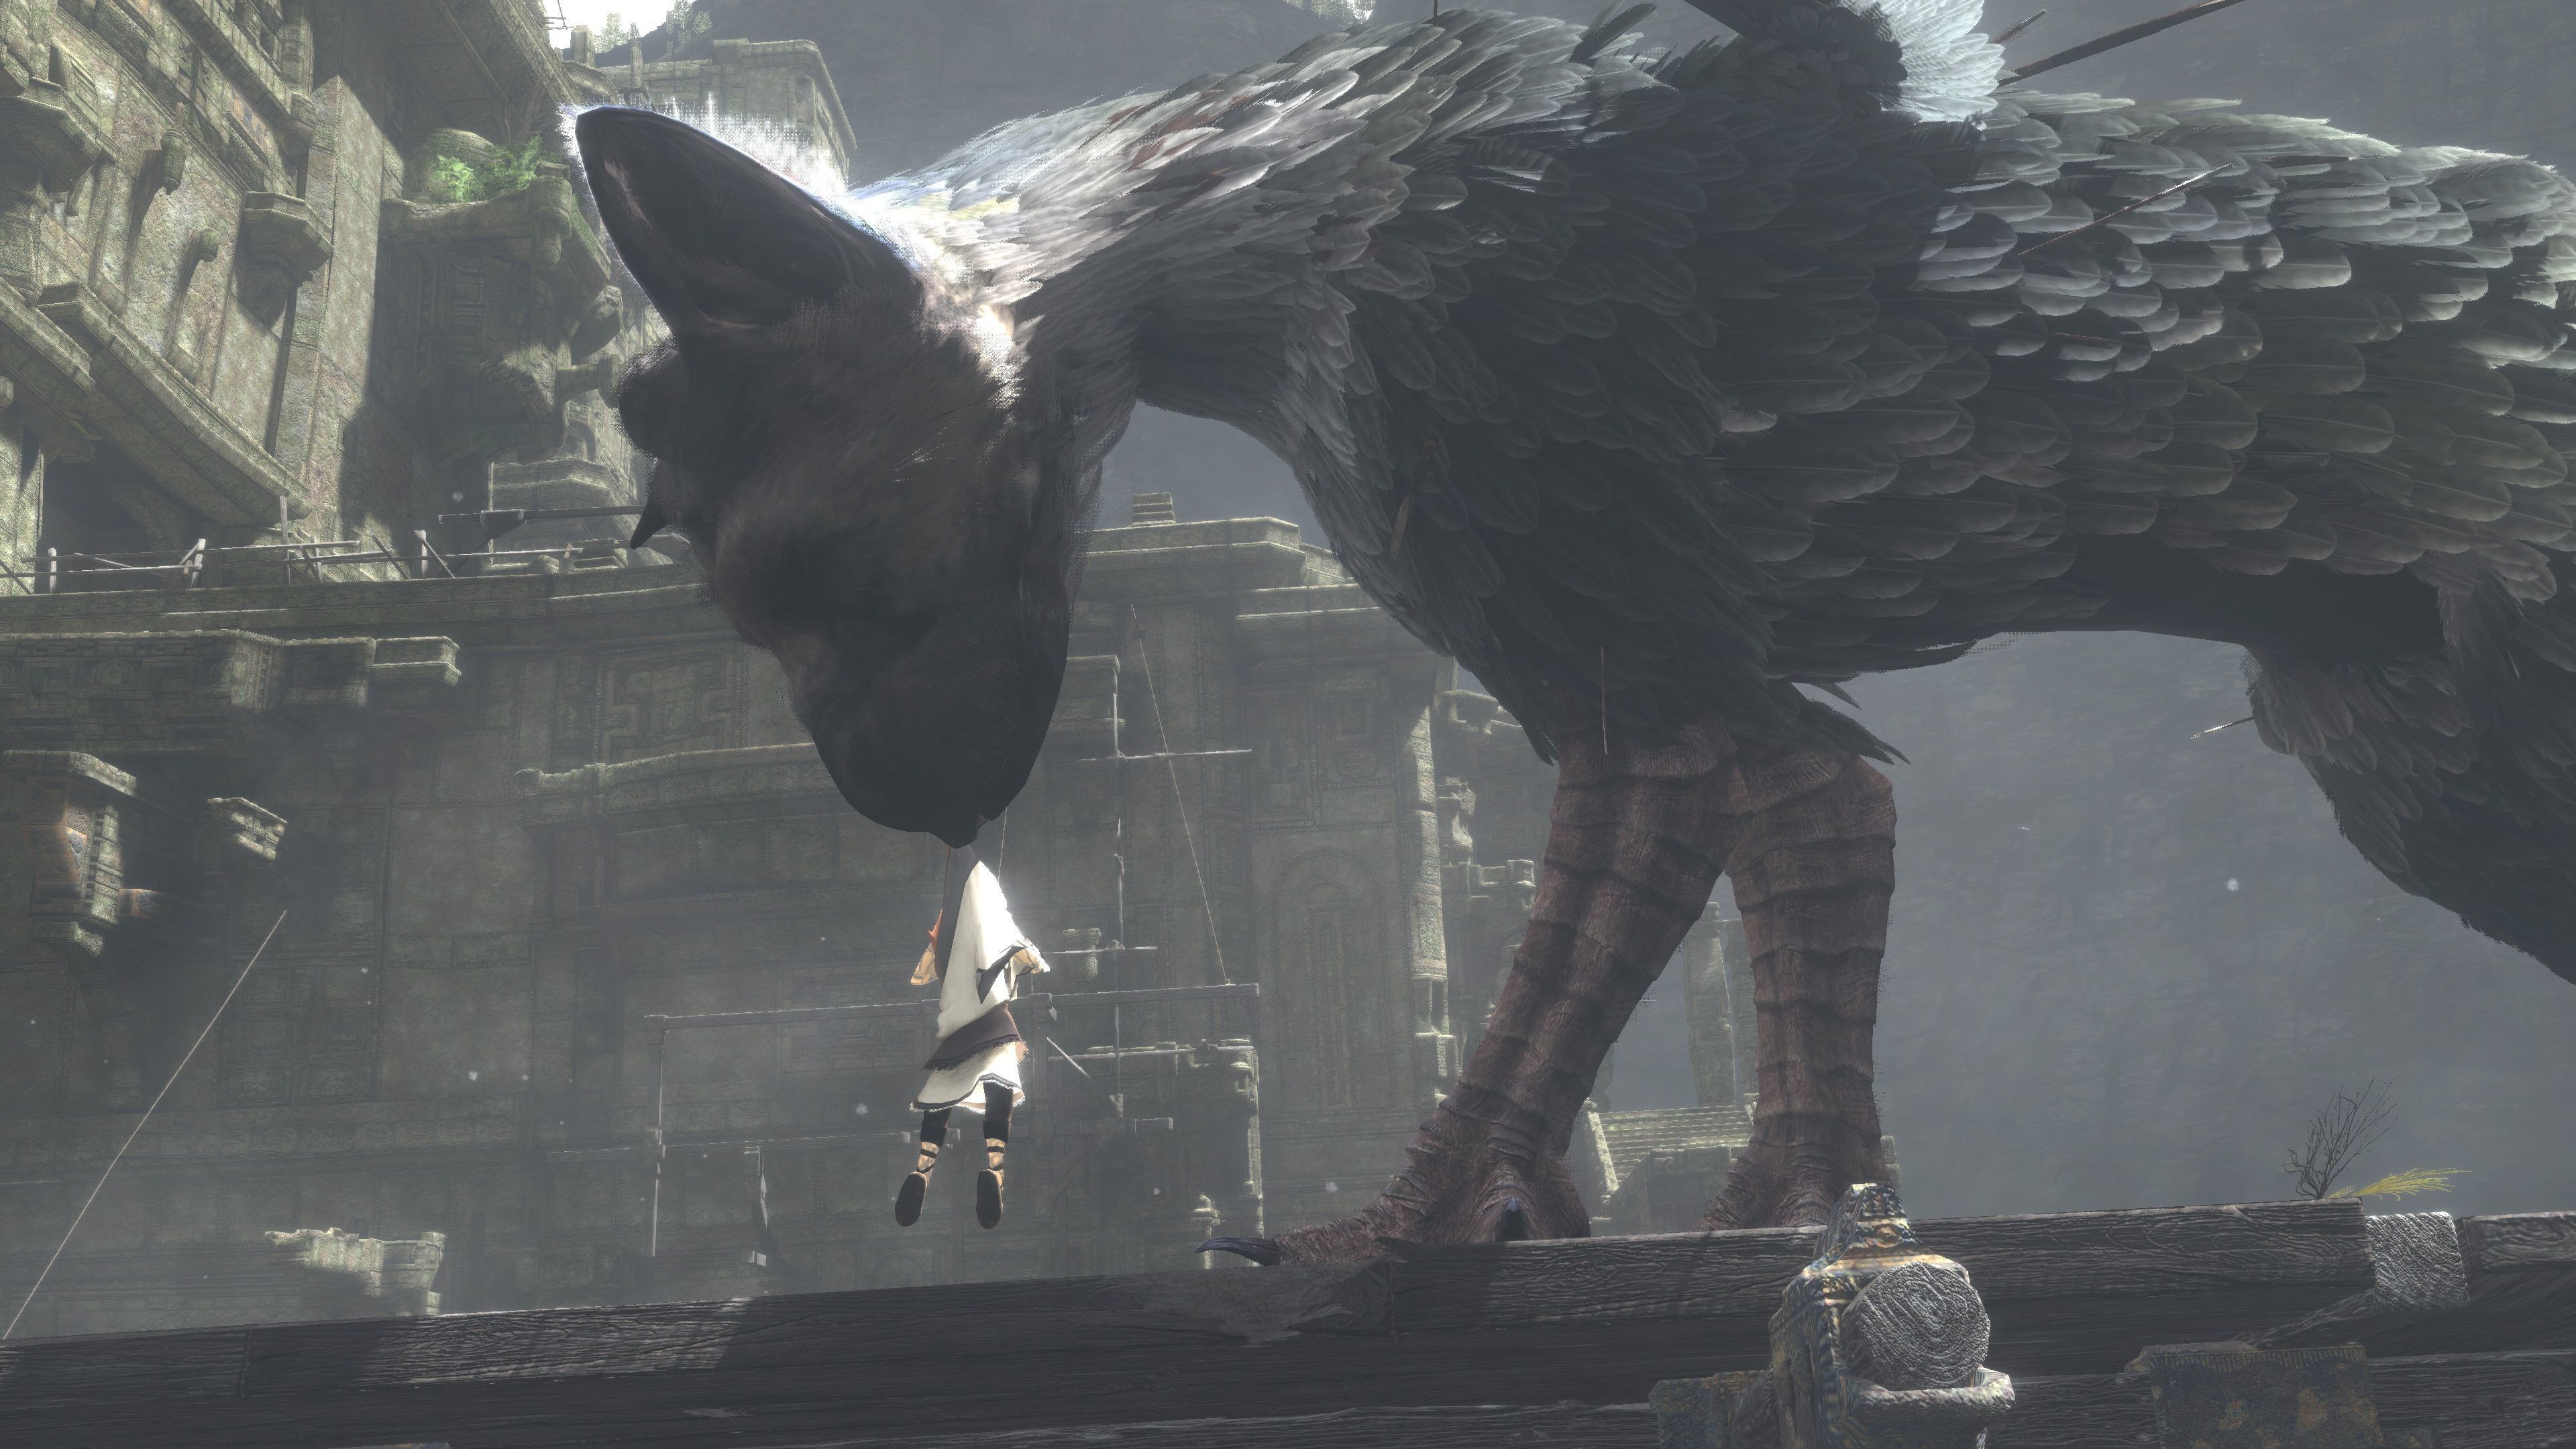 Trico The Last Guardian Wallpapers